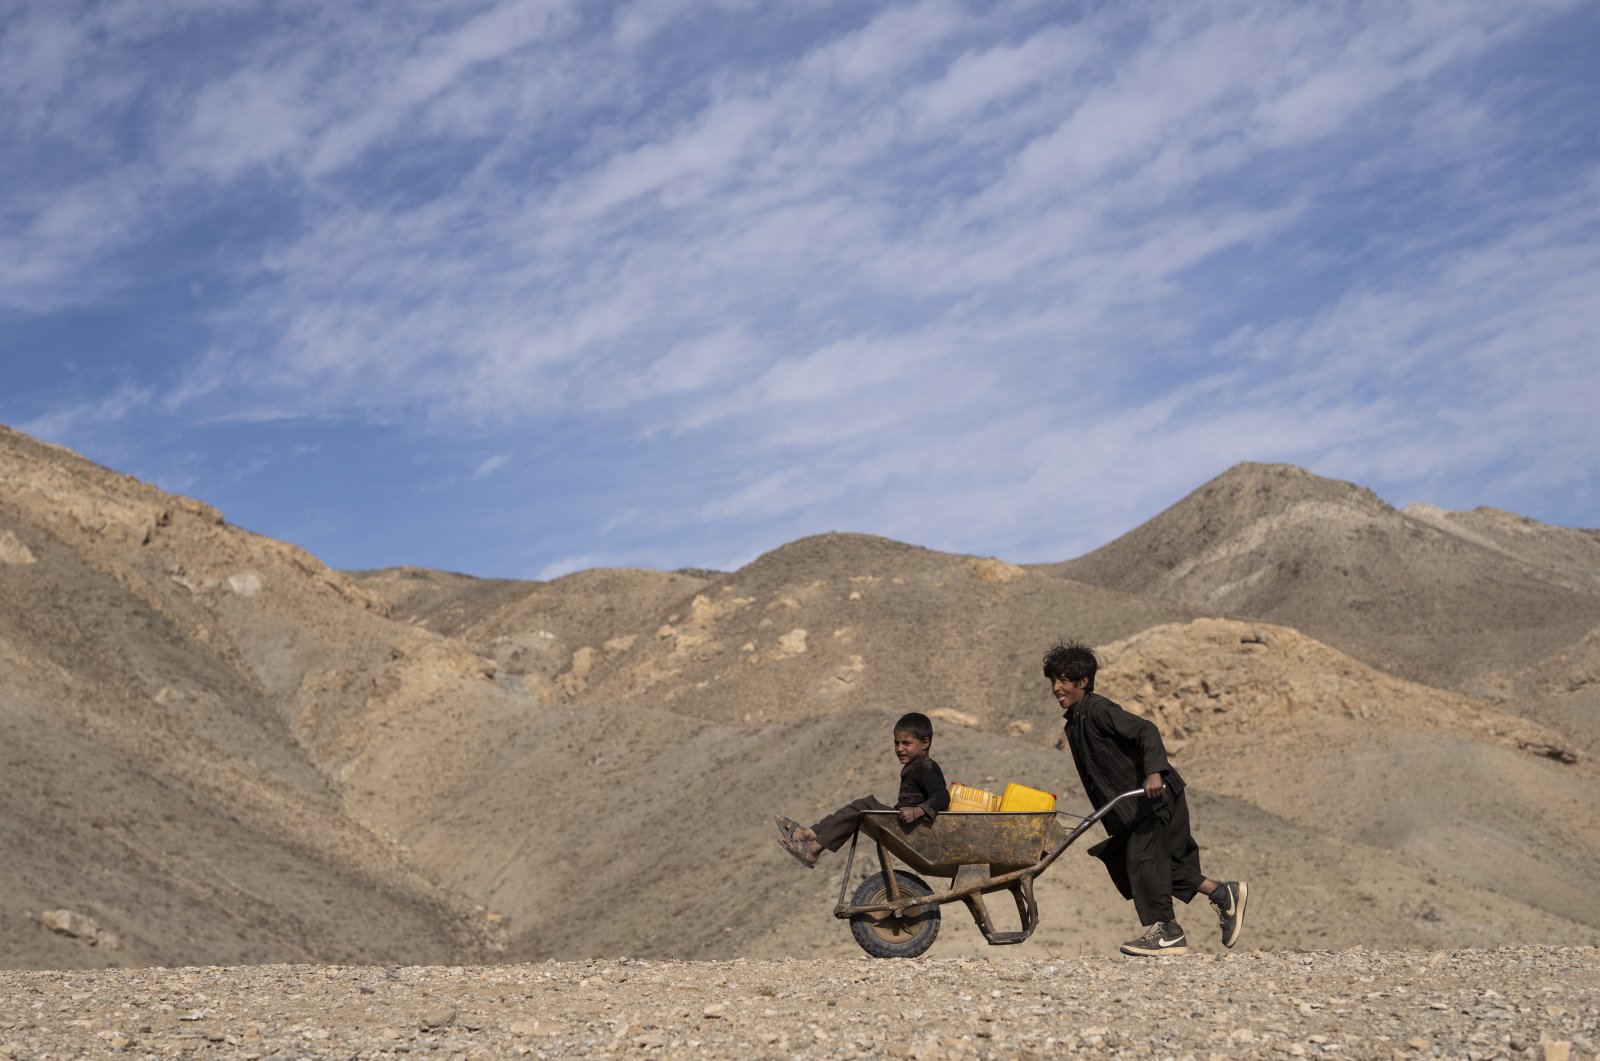 A boy pushes a wheelbarrow with canisters and his younger brother, on their way to collect water from a stagnant pool, about 3 kilometers (2 miles) from their home in Kamar Kalagh village outside Herat, Afghanistan, Nov. 26, 2021. (AP Photo)